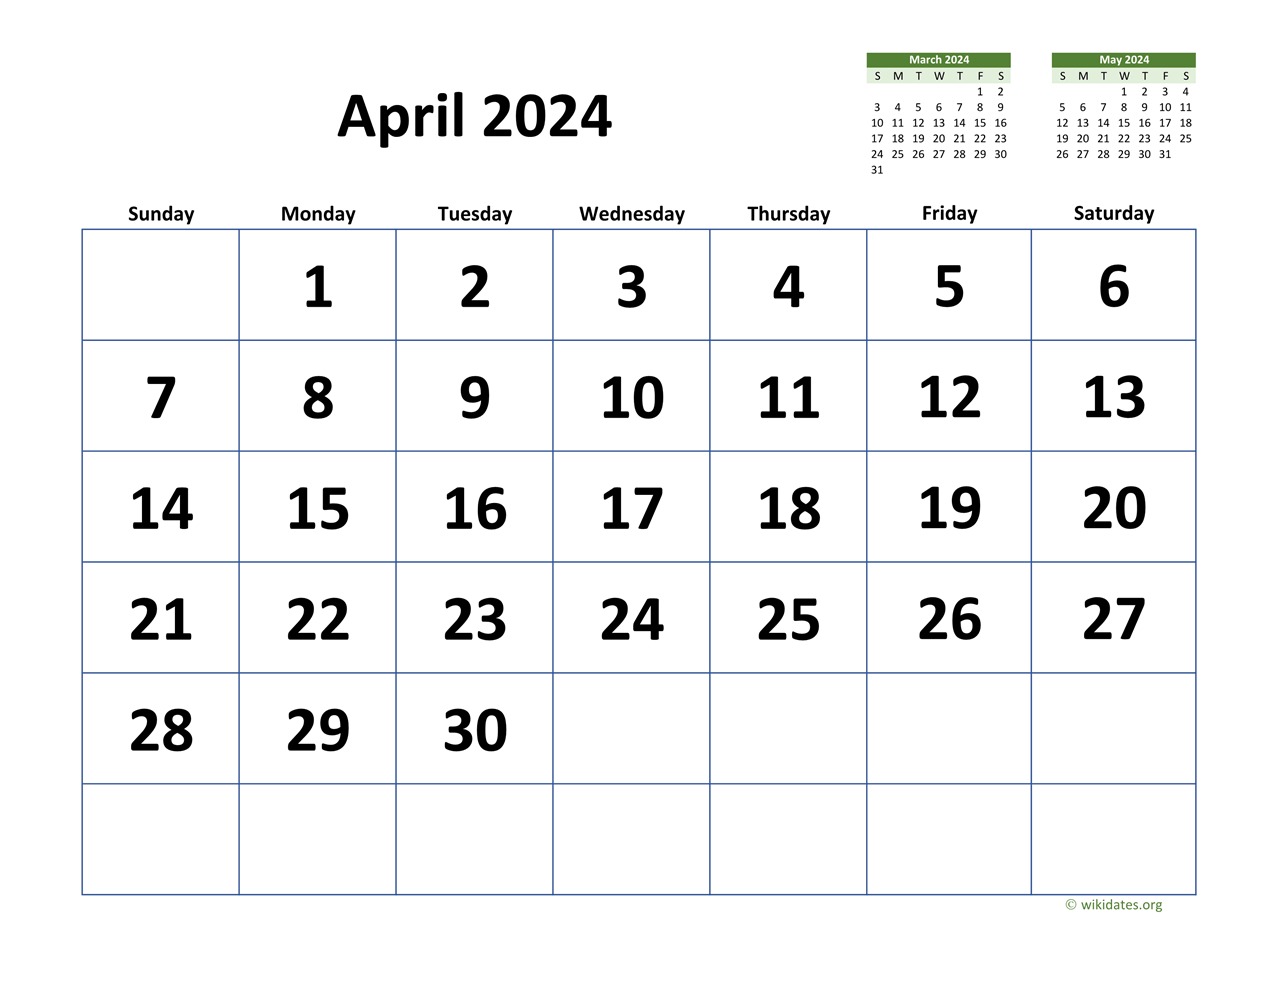 April 2024 Calendar with Extra-large Dates | WikiDates.org